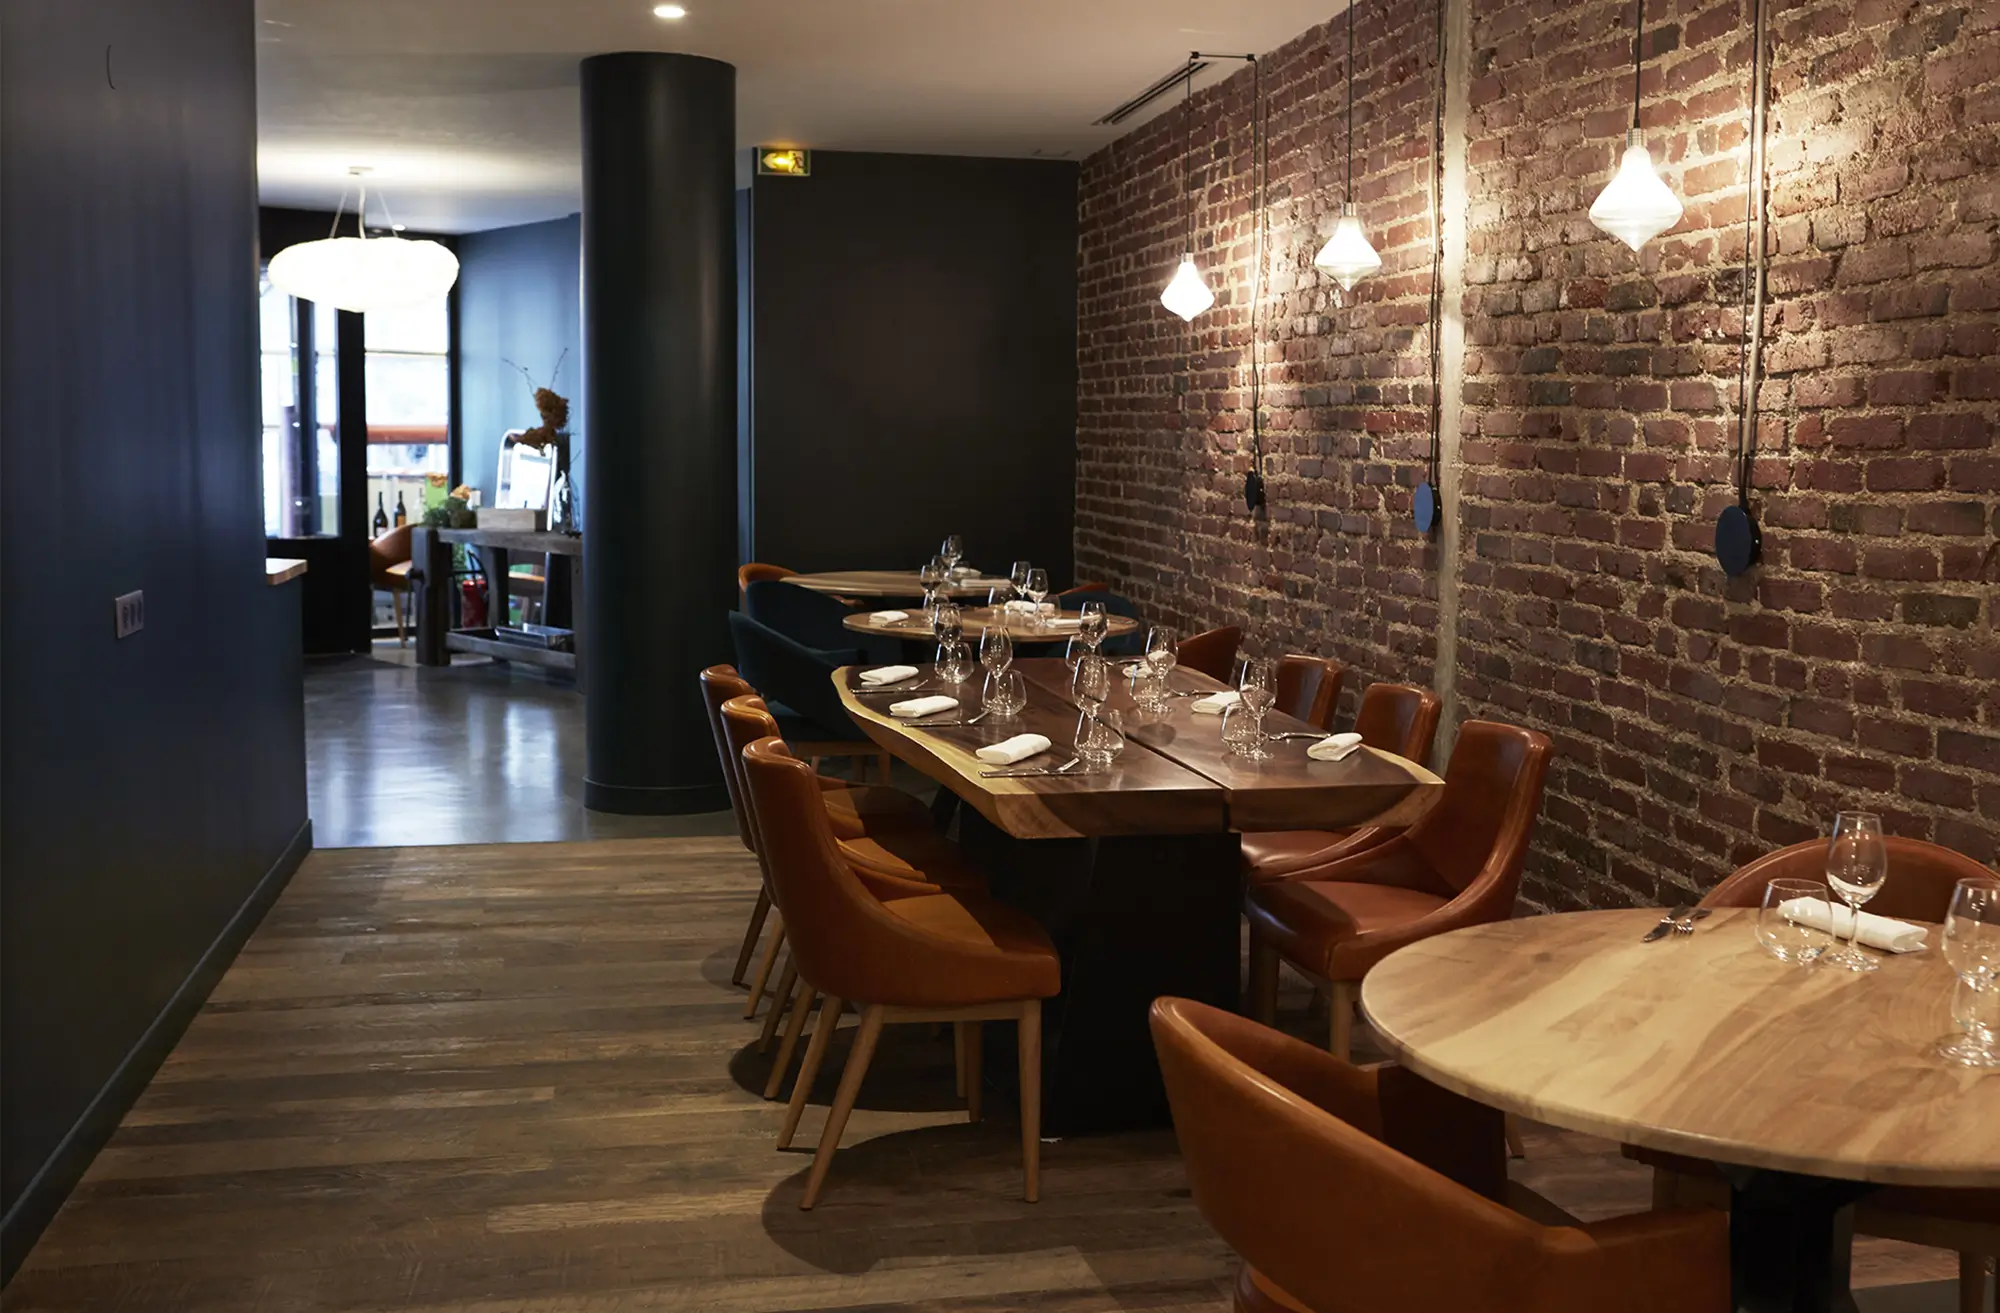 The interior of ACCENTS Table Bourse, an affordable Michelin star restaurant, featuring a dining area with exposed brick walls, modern pendant lights, and elegantly set tables with leather chairs.